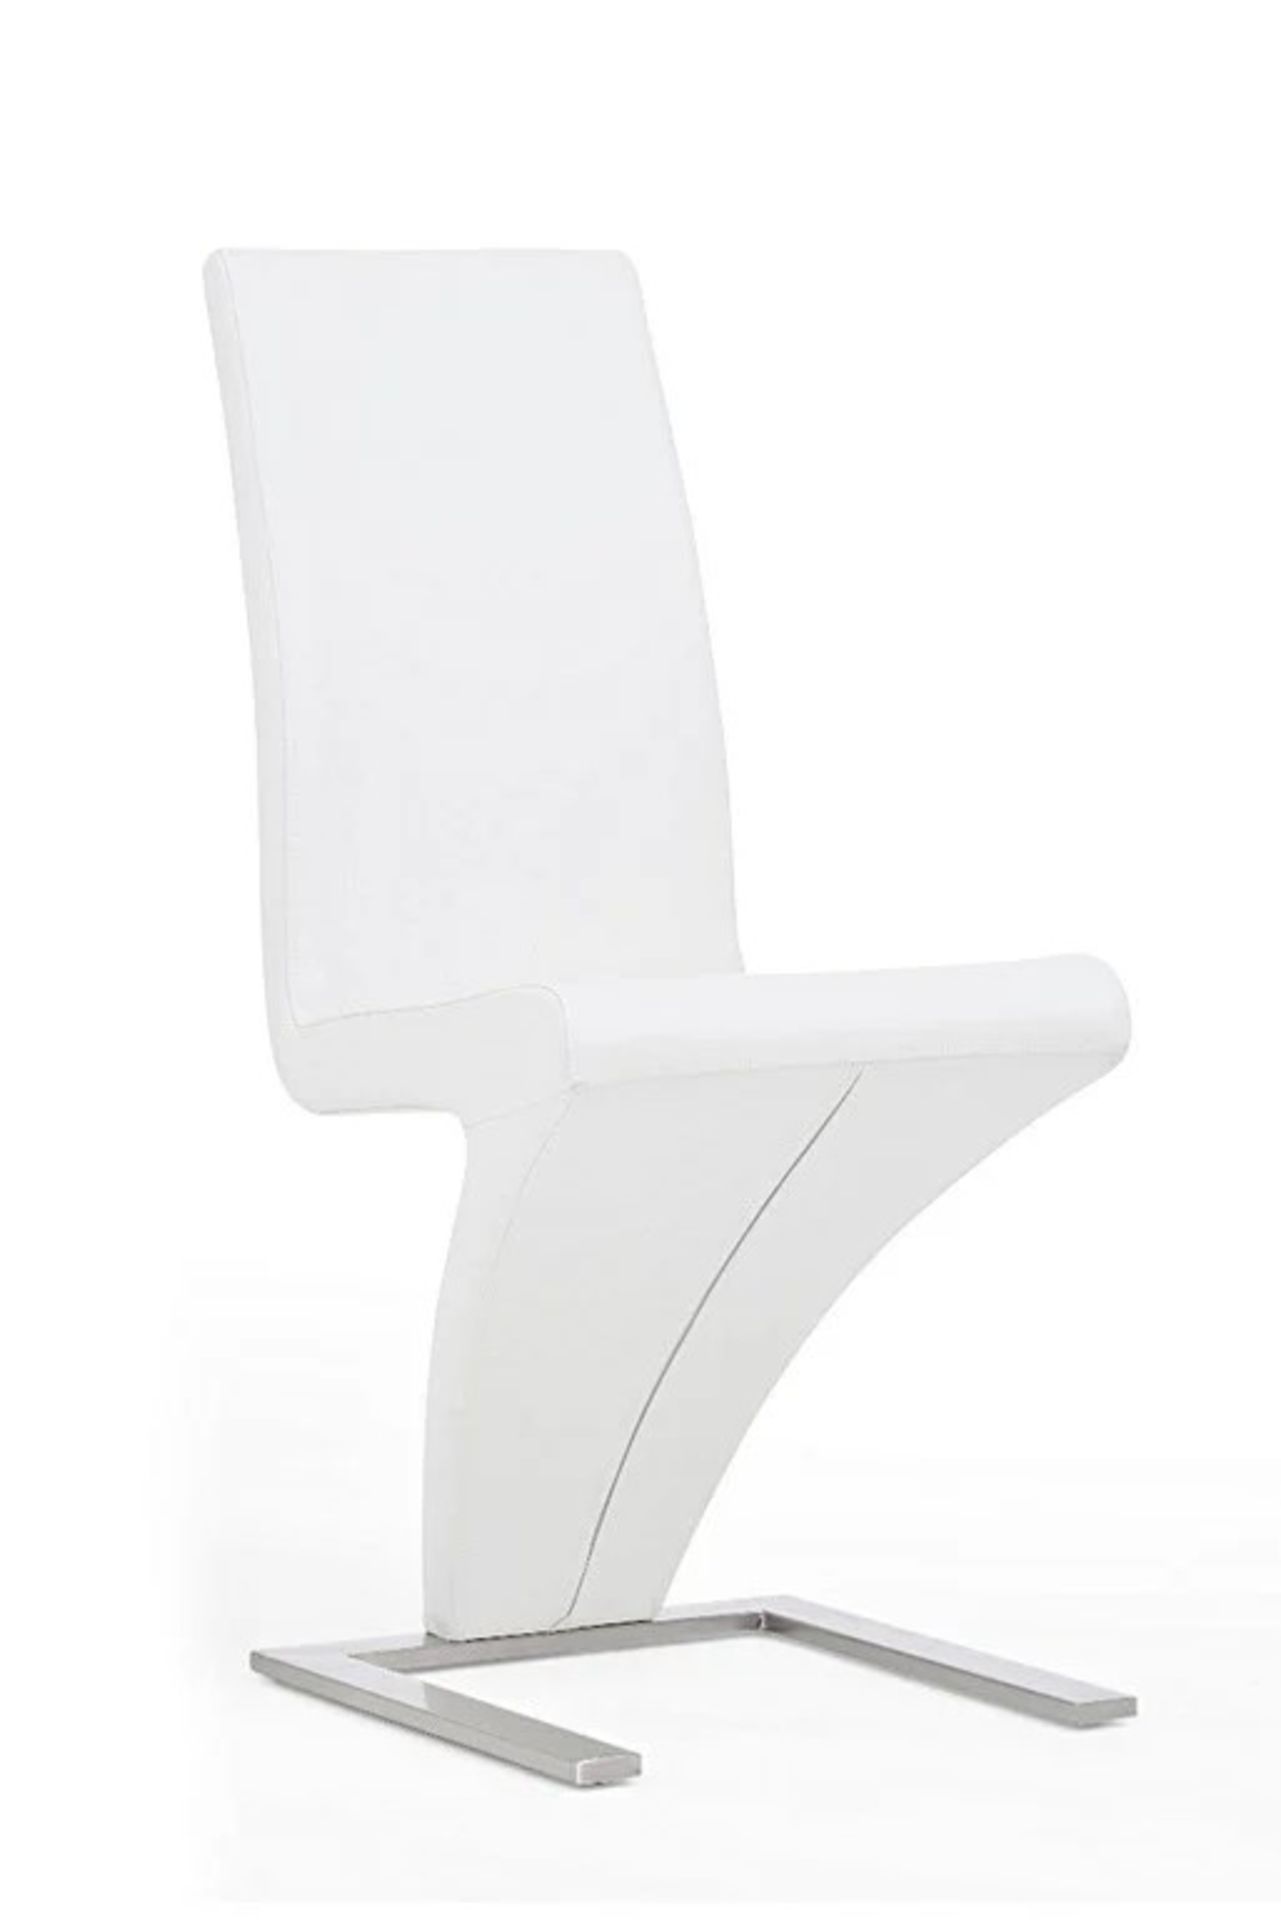 A set of 4 x Hampstead Z White Faux Leather Dining Chairs striking chrome and faux leather design